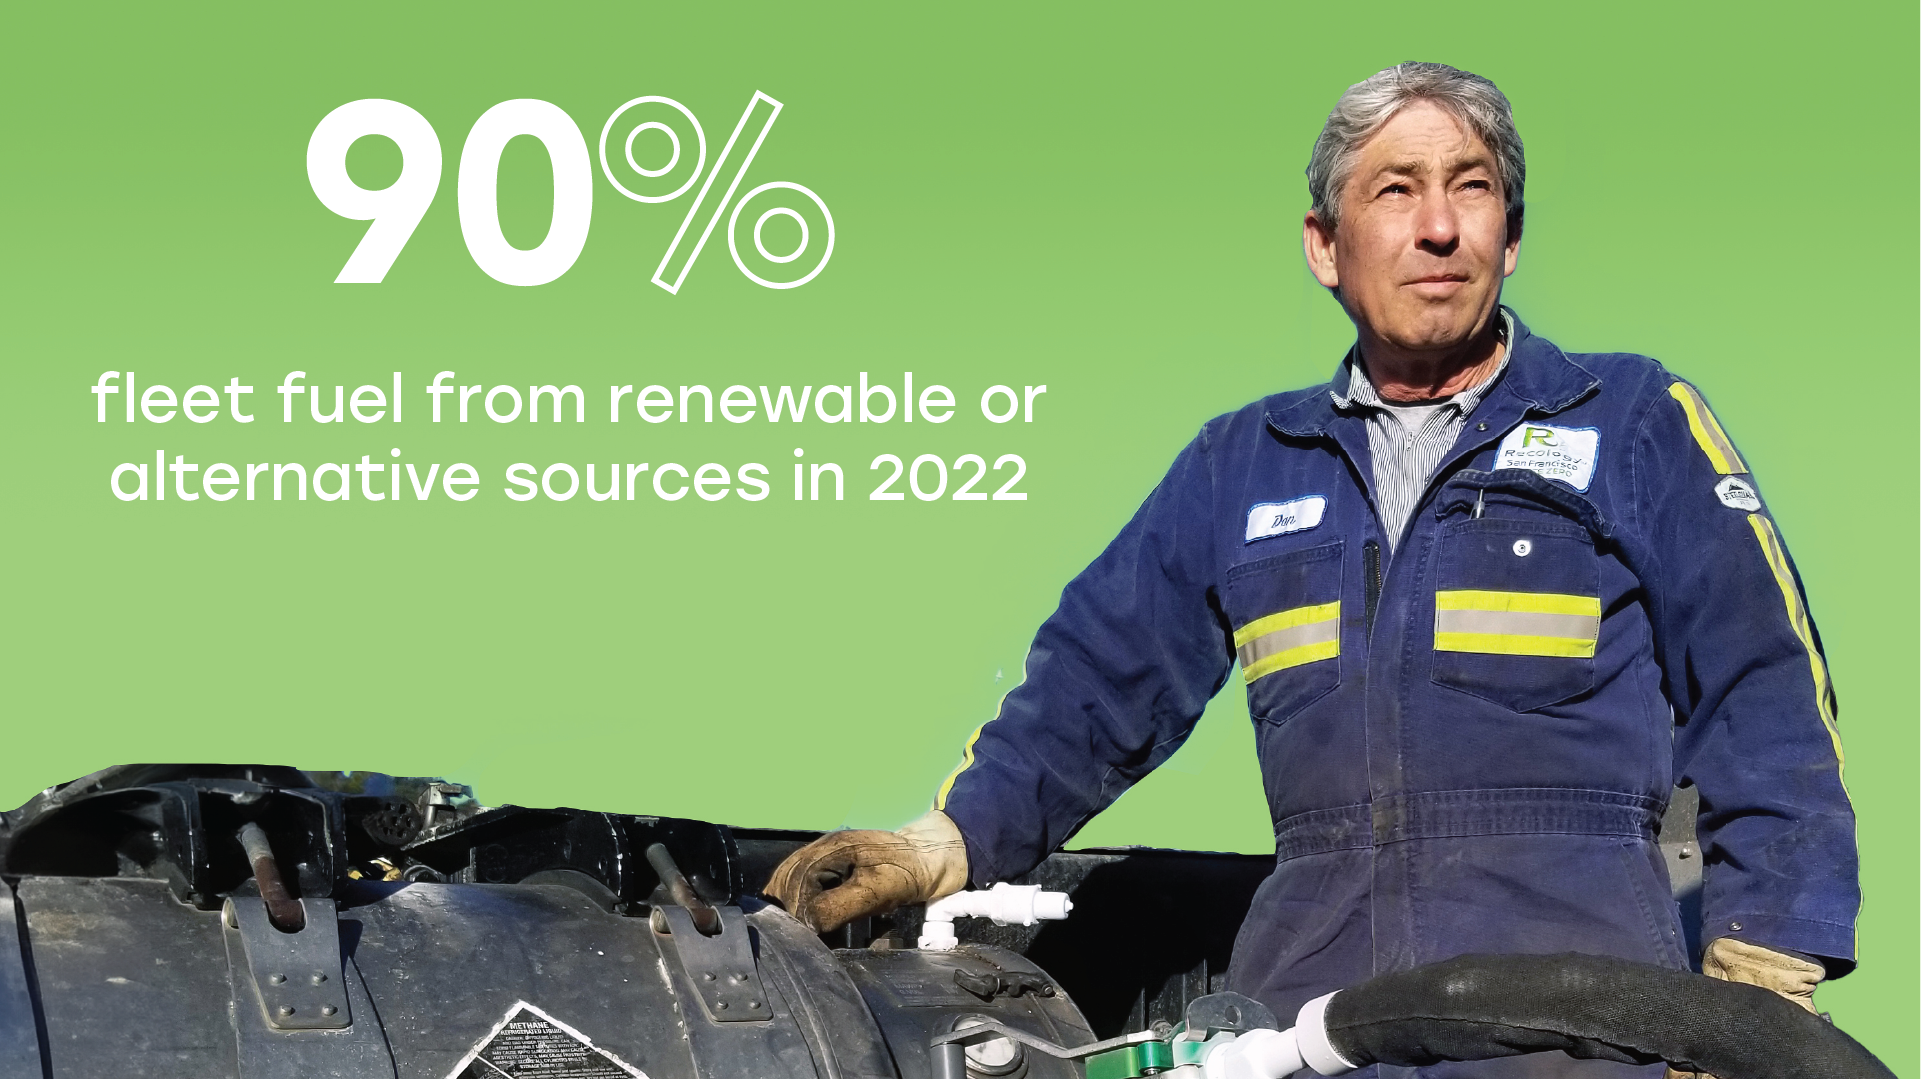 90% of fleet fuel from renewable or alternative sources in 2022